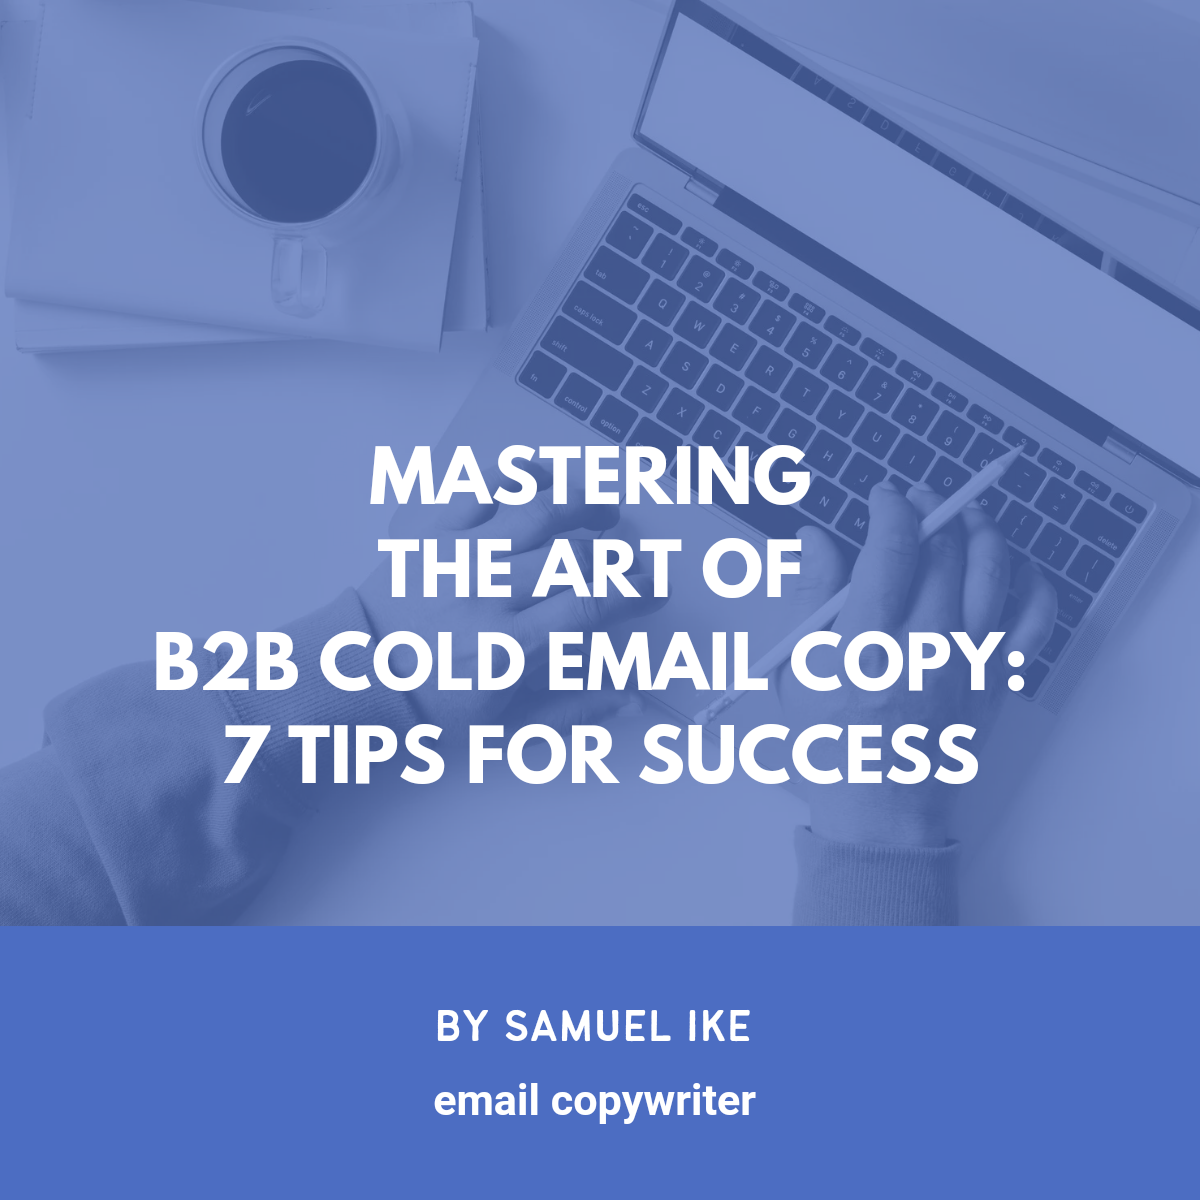 Mastering the Art of B2B Cold Email Copy: 7 Tips for Success